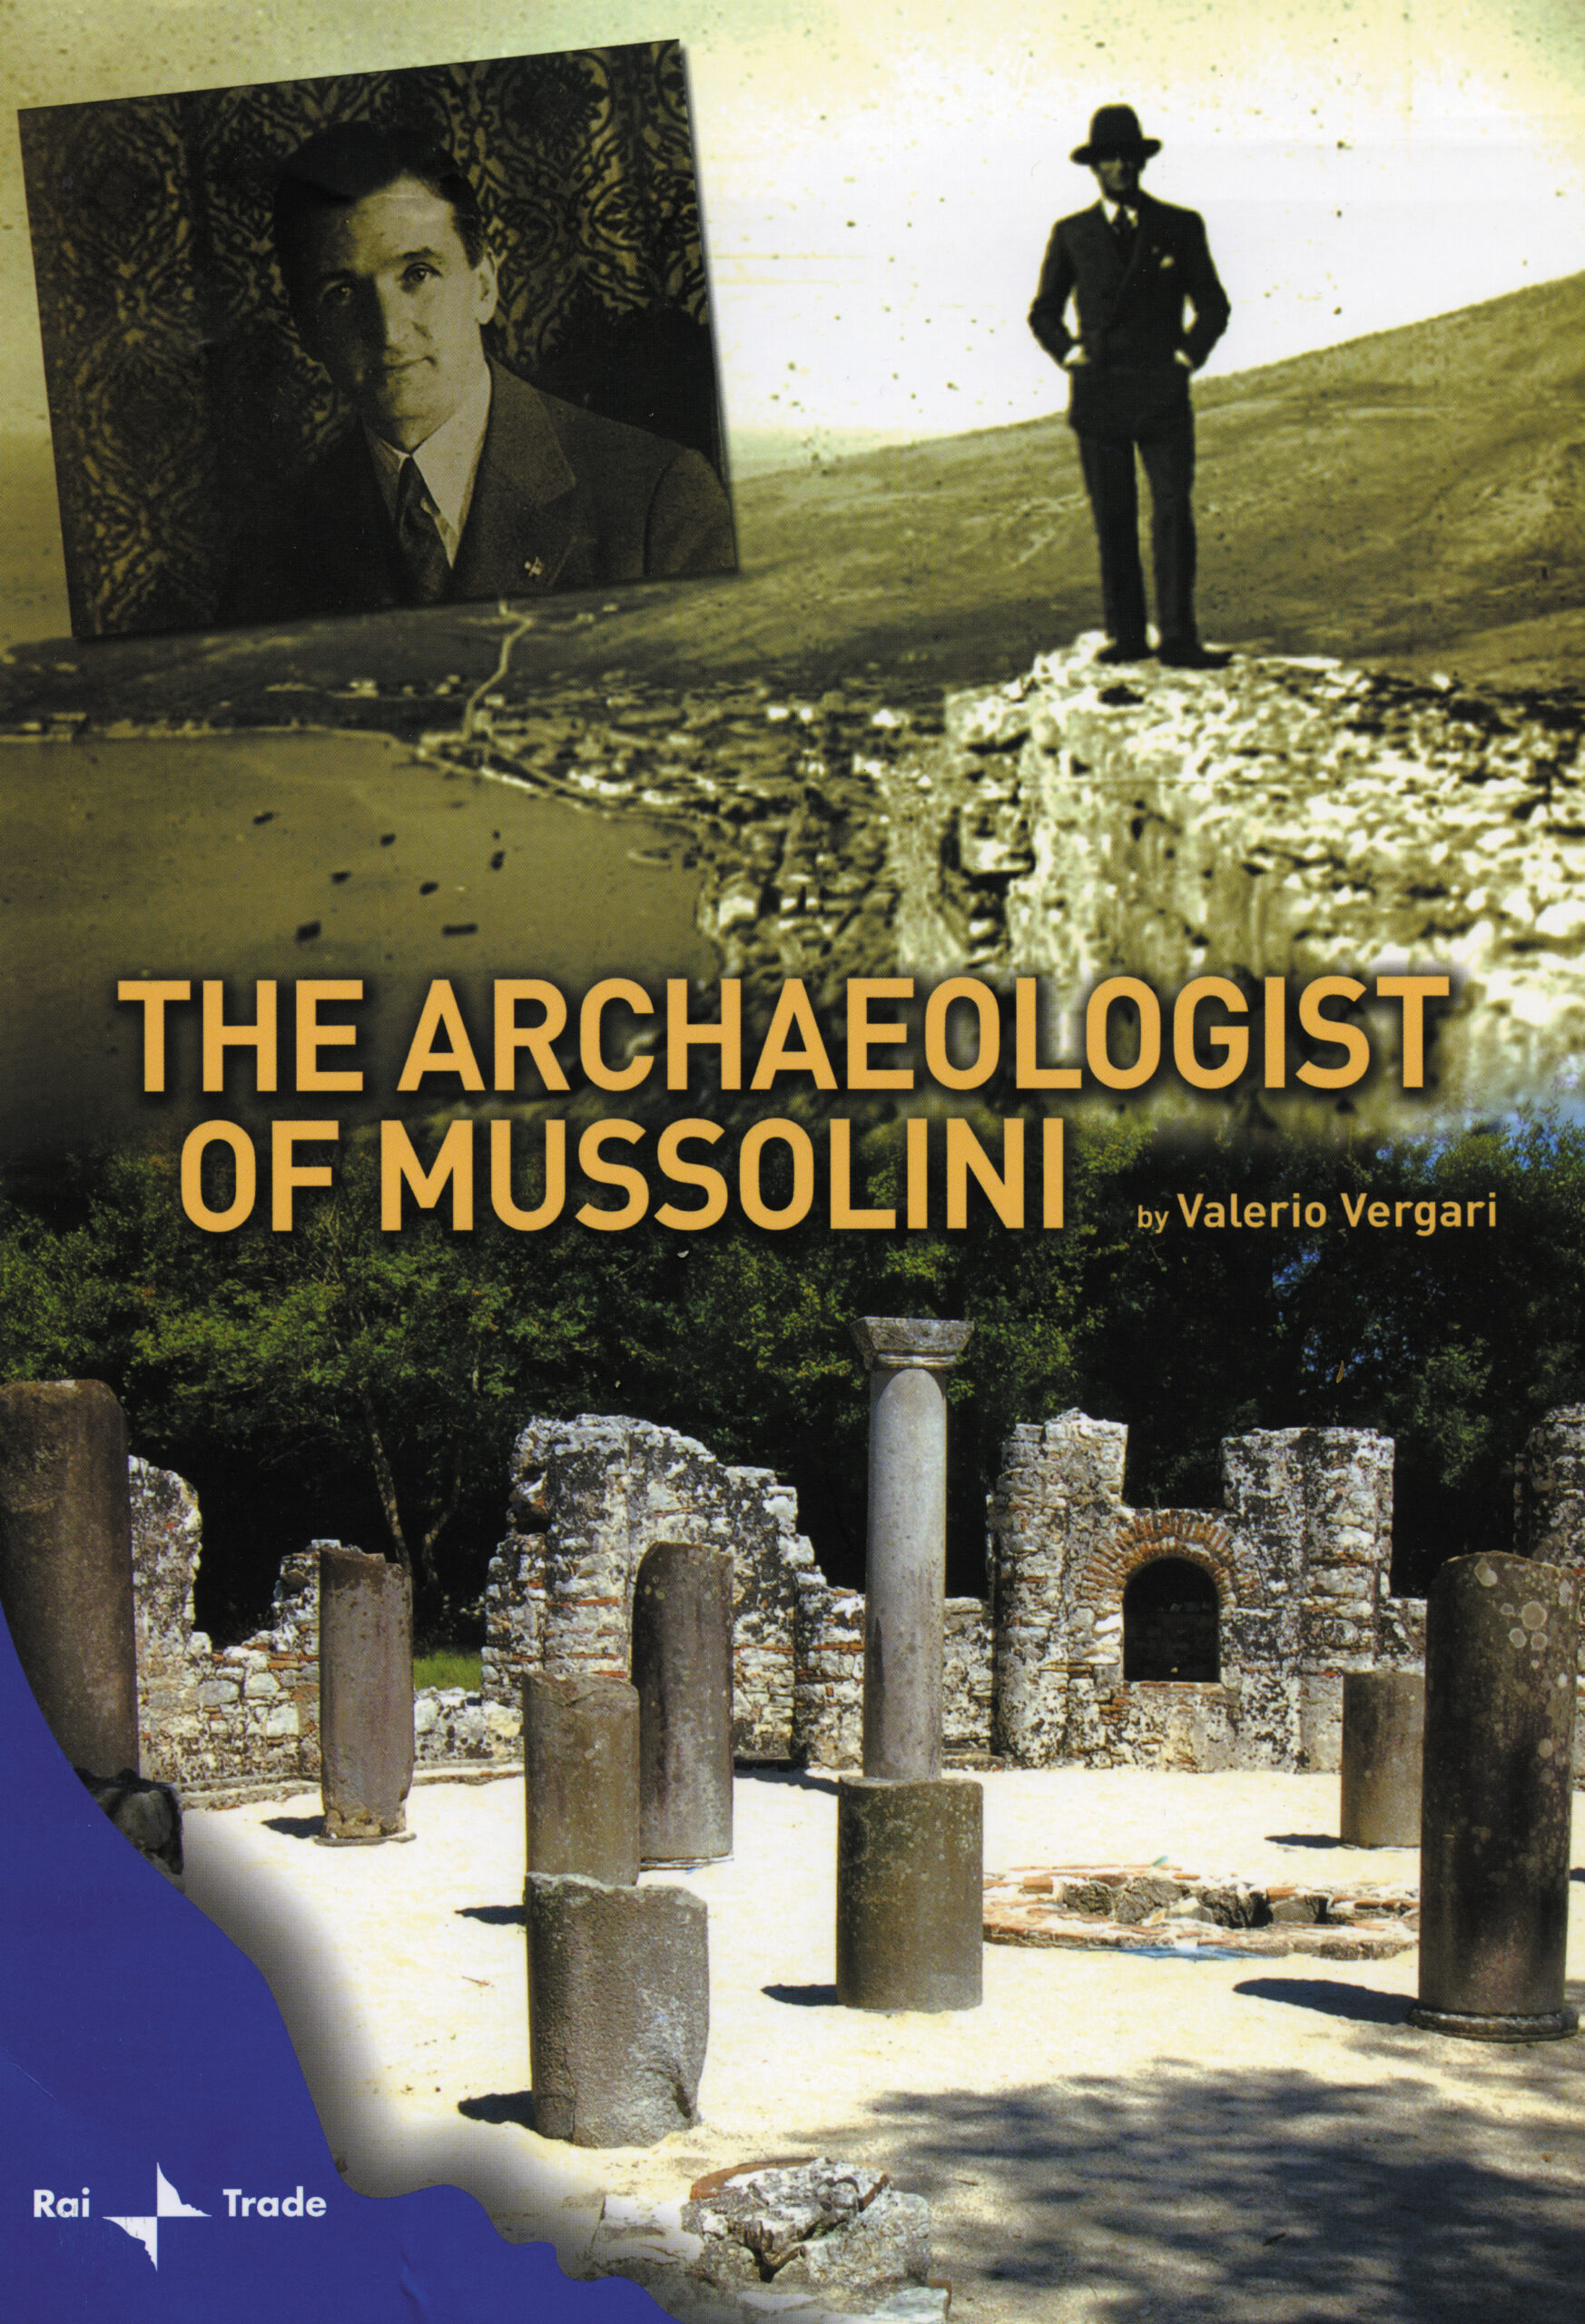 The archaeologist of Musolini